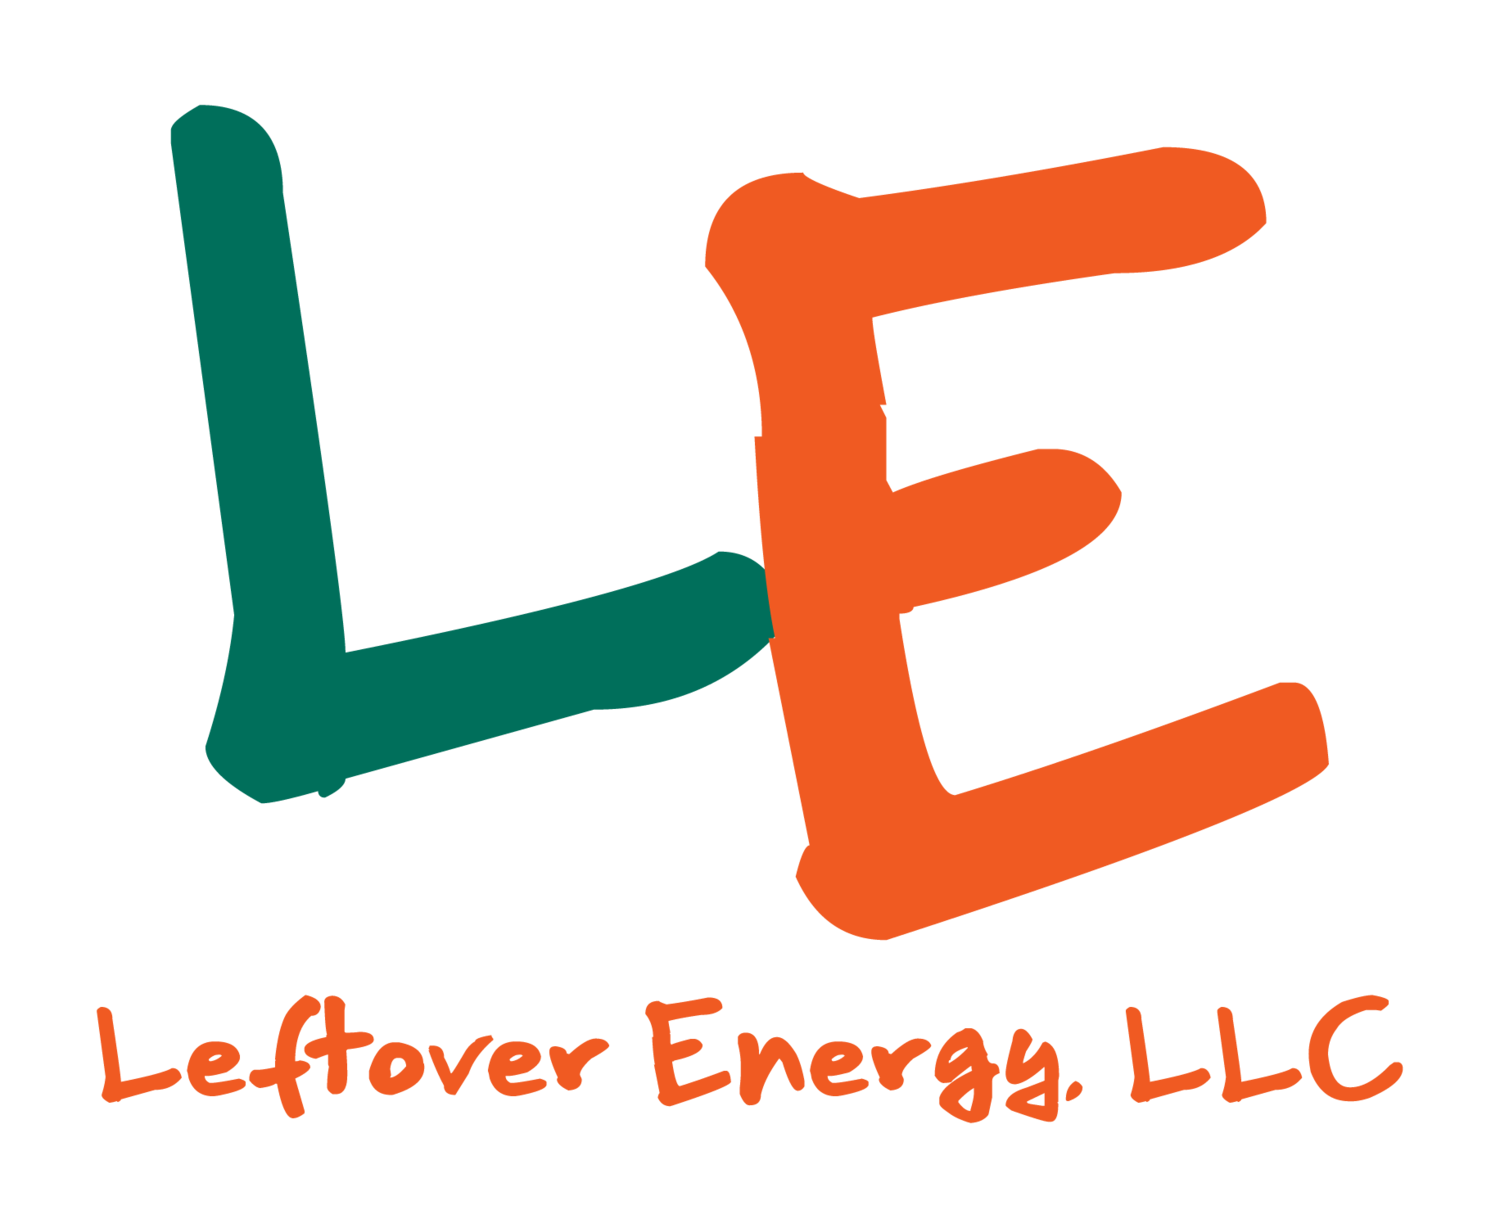 WE ARE LEFTOVER ENERGY, LLC